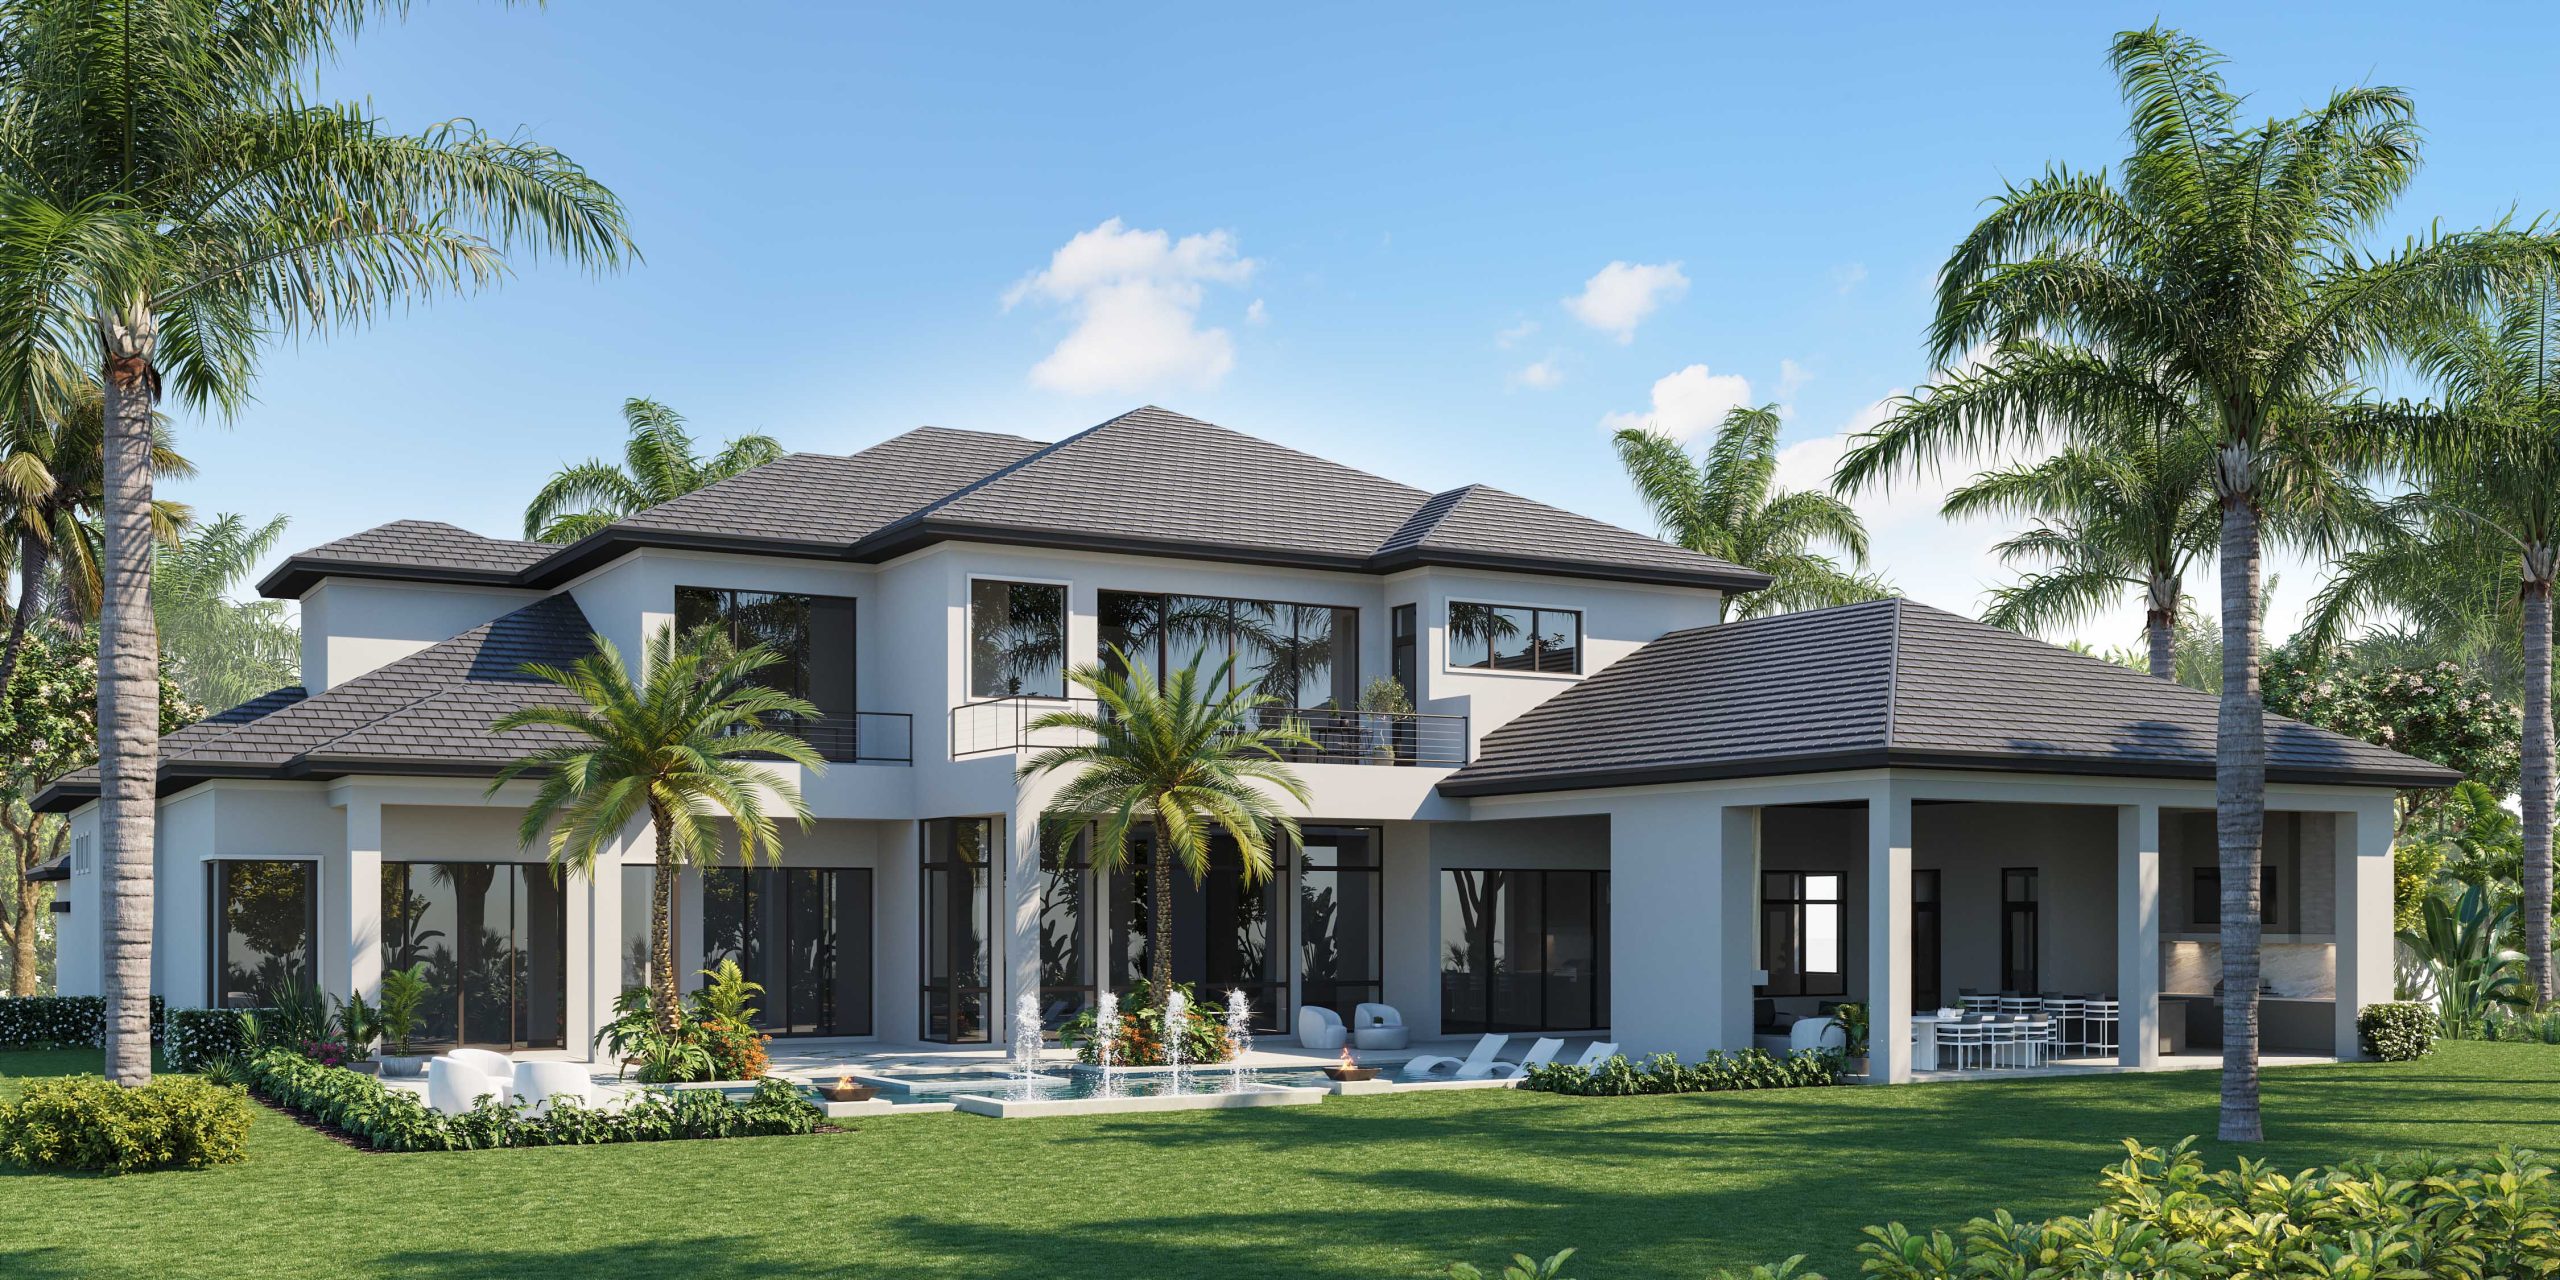 Featured on Dwell: The Agency’s Resop Team’s Unveils Multiple New Listings in Pine Ridge, Representing Over $90M in Custom Built Estates in Naples Most Sought-After Neighborhood